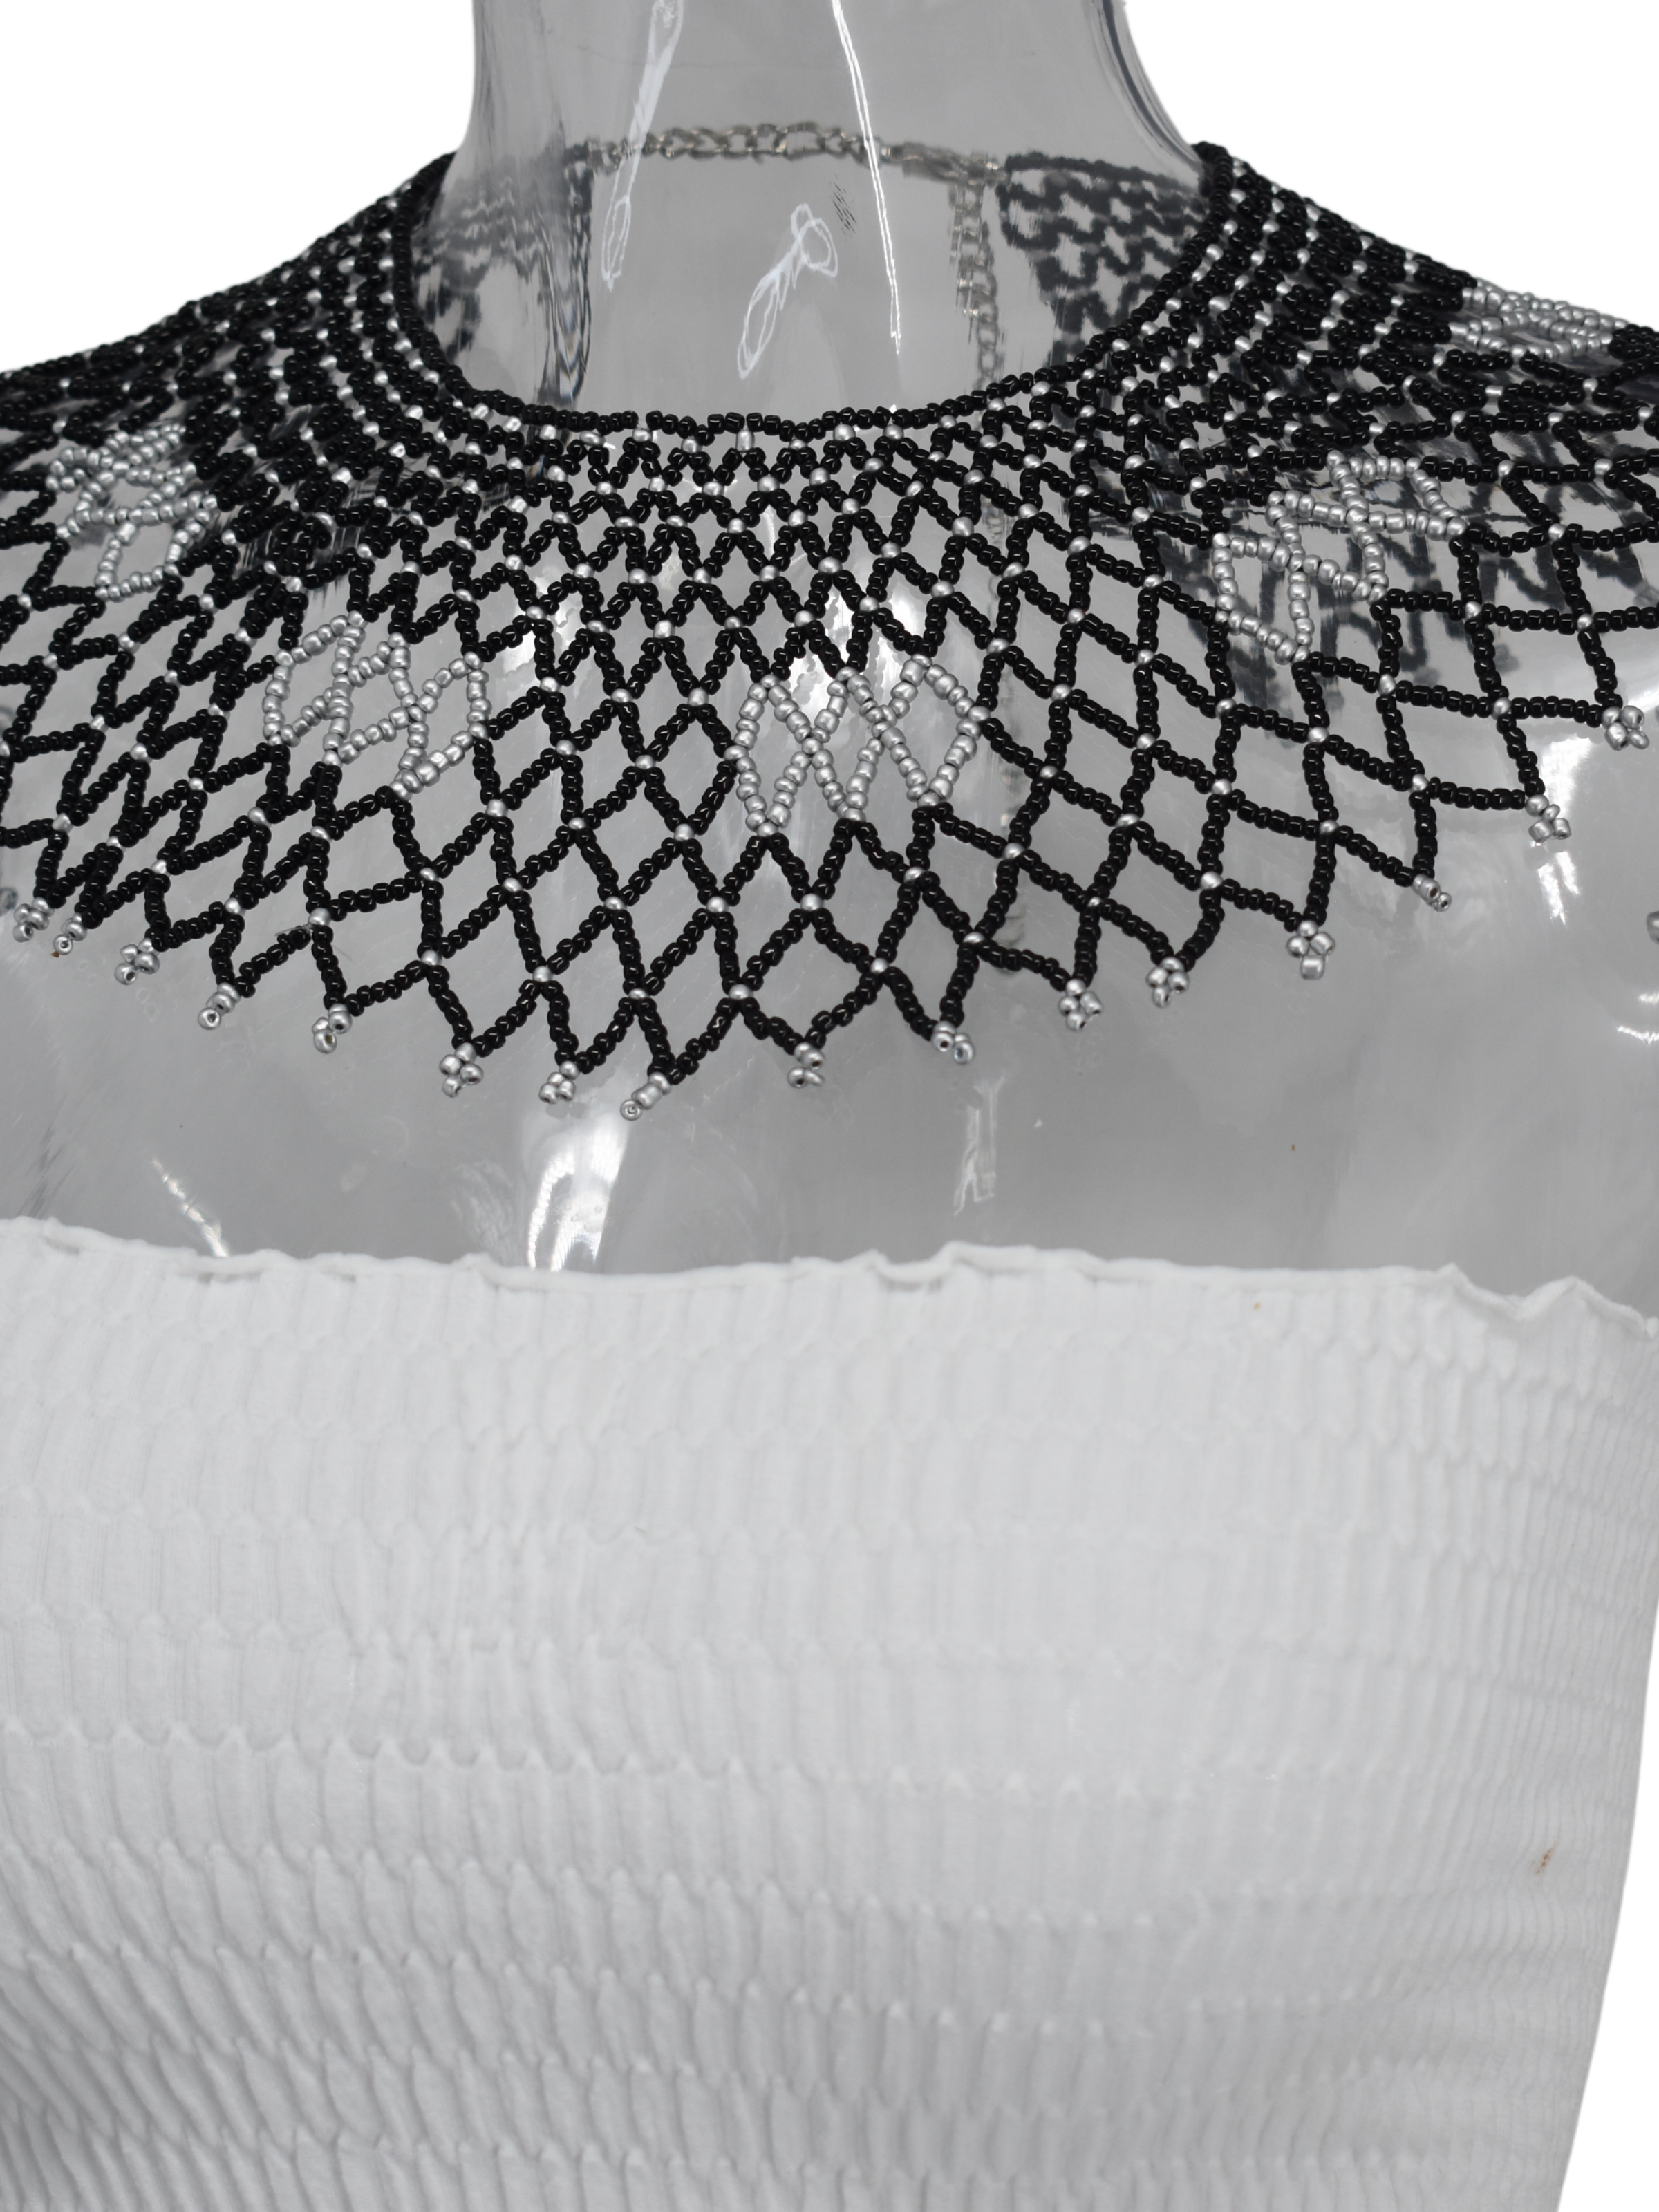 Our Nicola black and silver dainty bib styled necklace will have you feeling like royalty on any given day of the week.